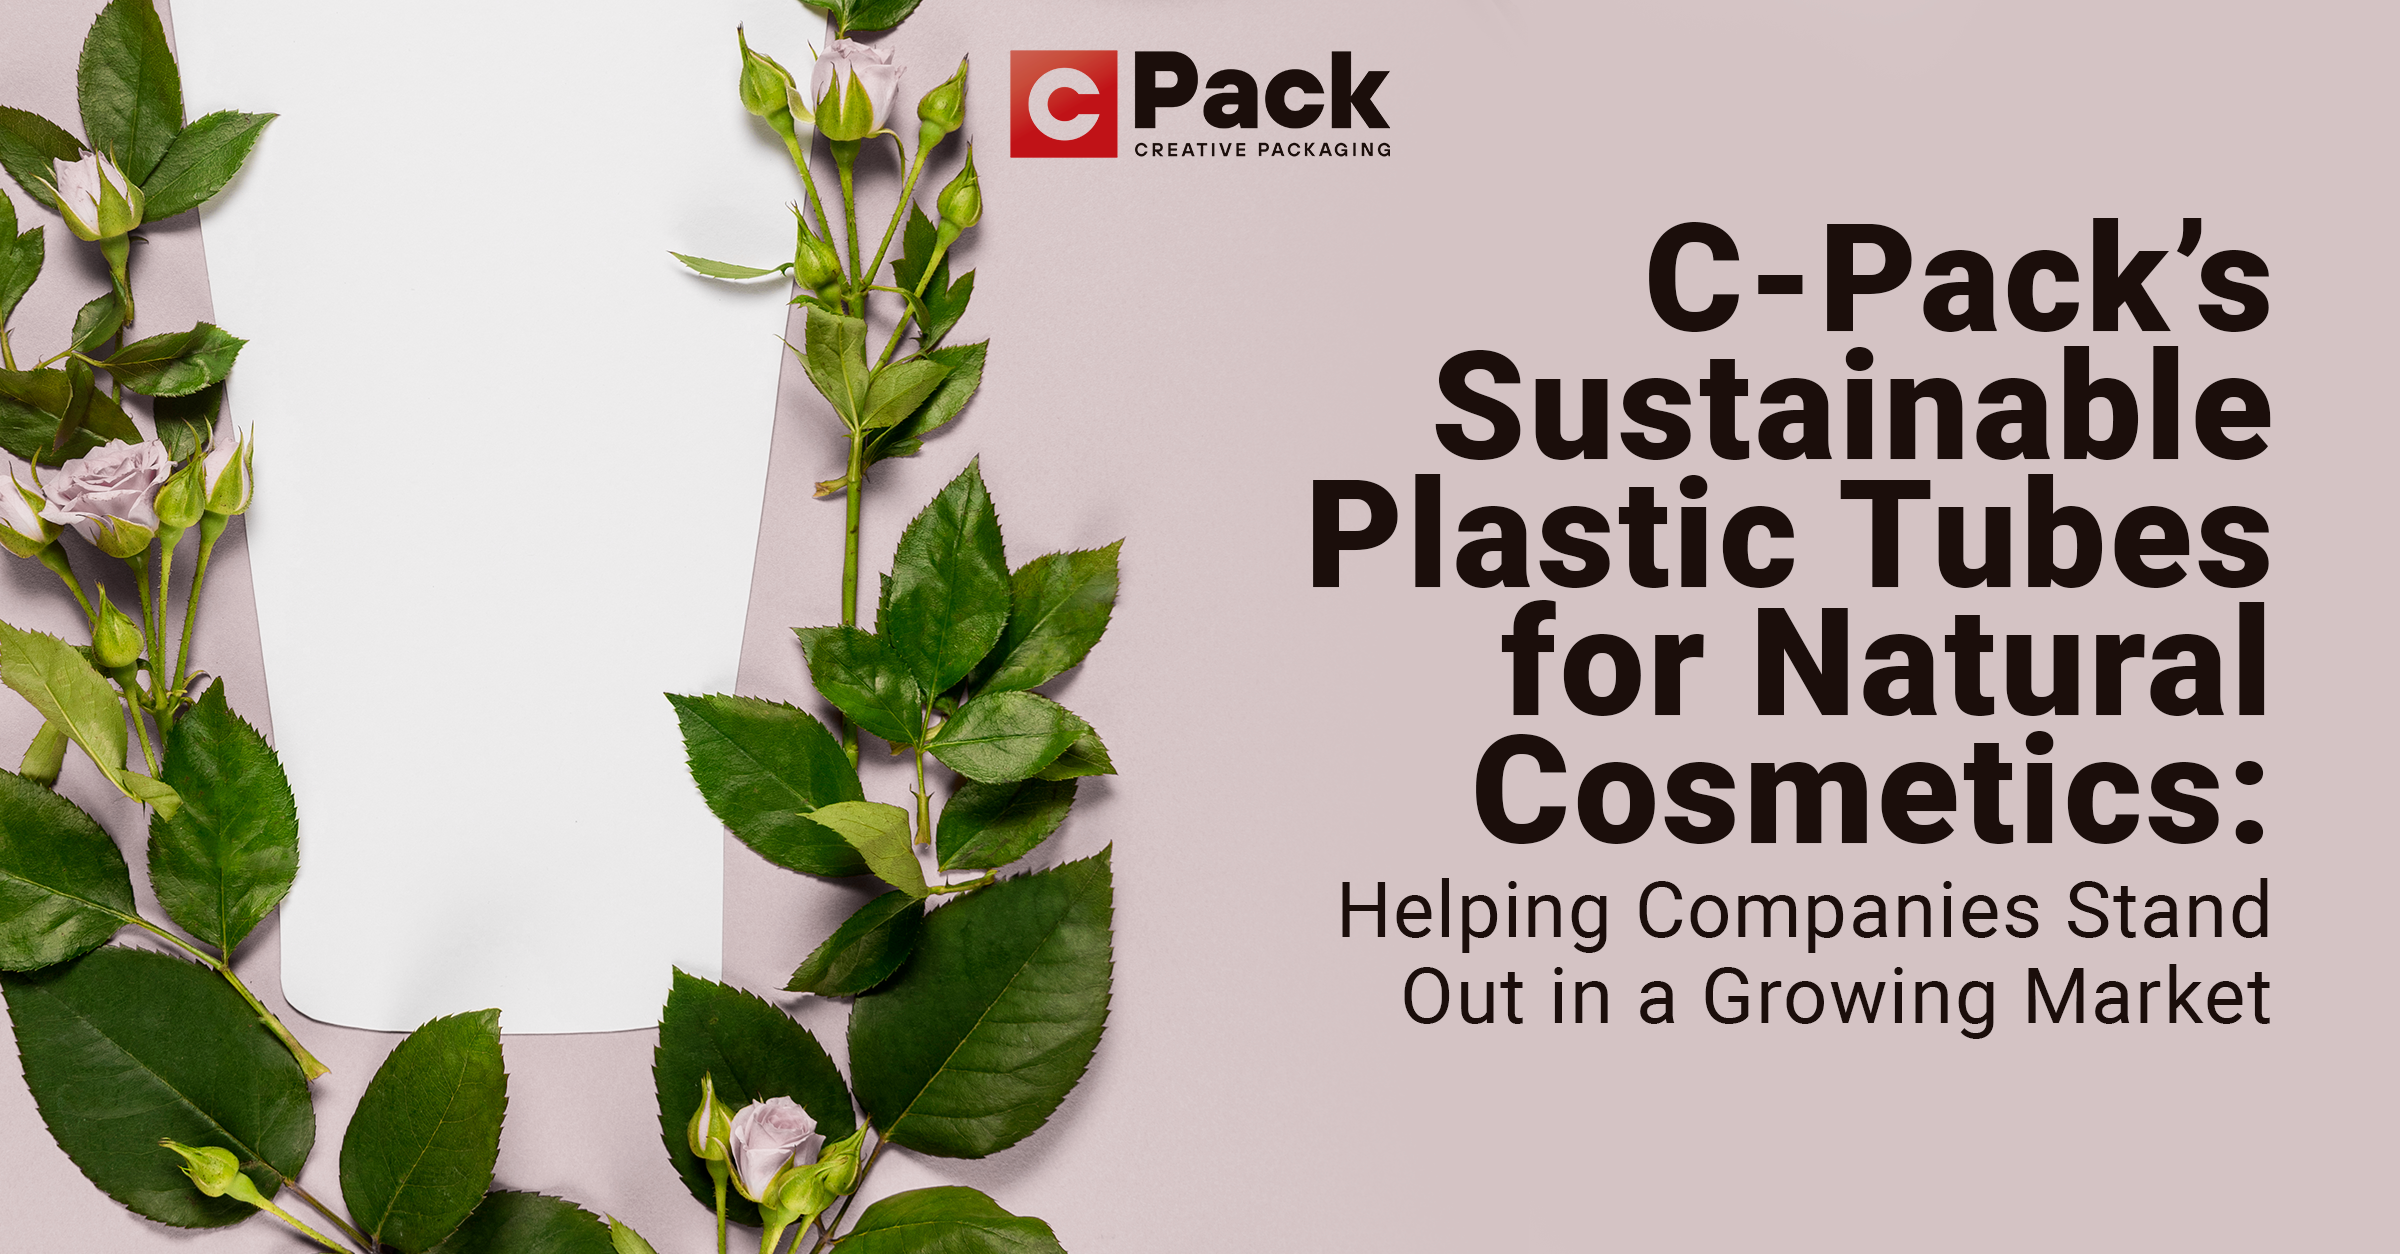 Image featuring C-Pack's sustainable plastic tubes for natural cosmetics, promoting differentiation in a growing market.